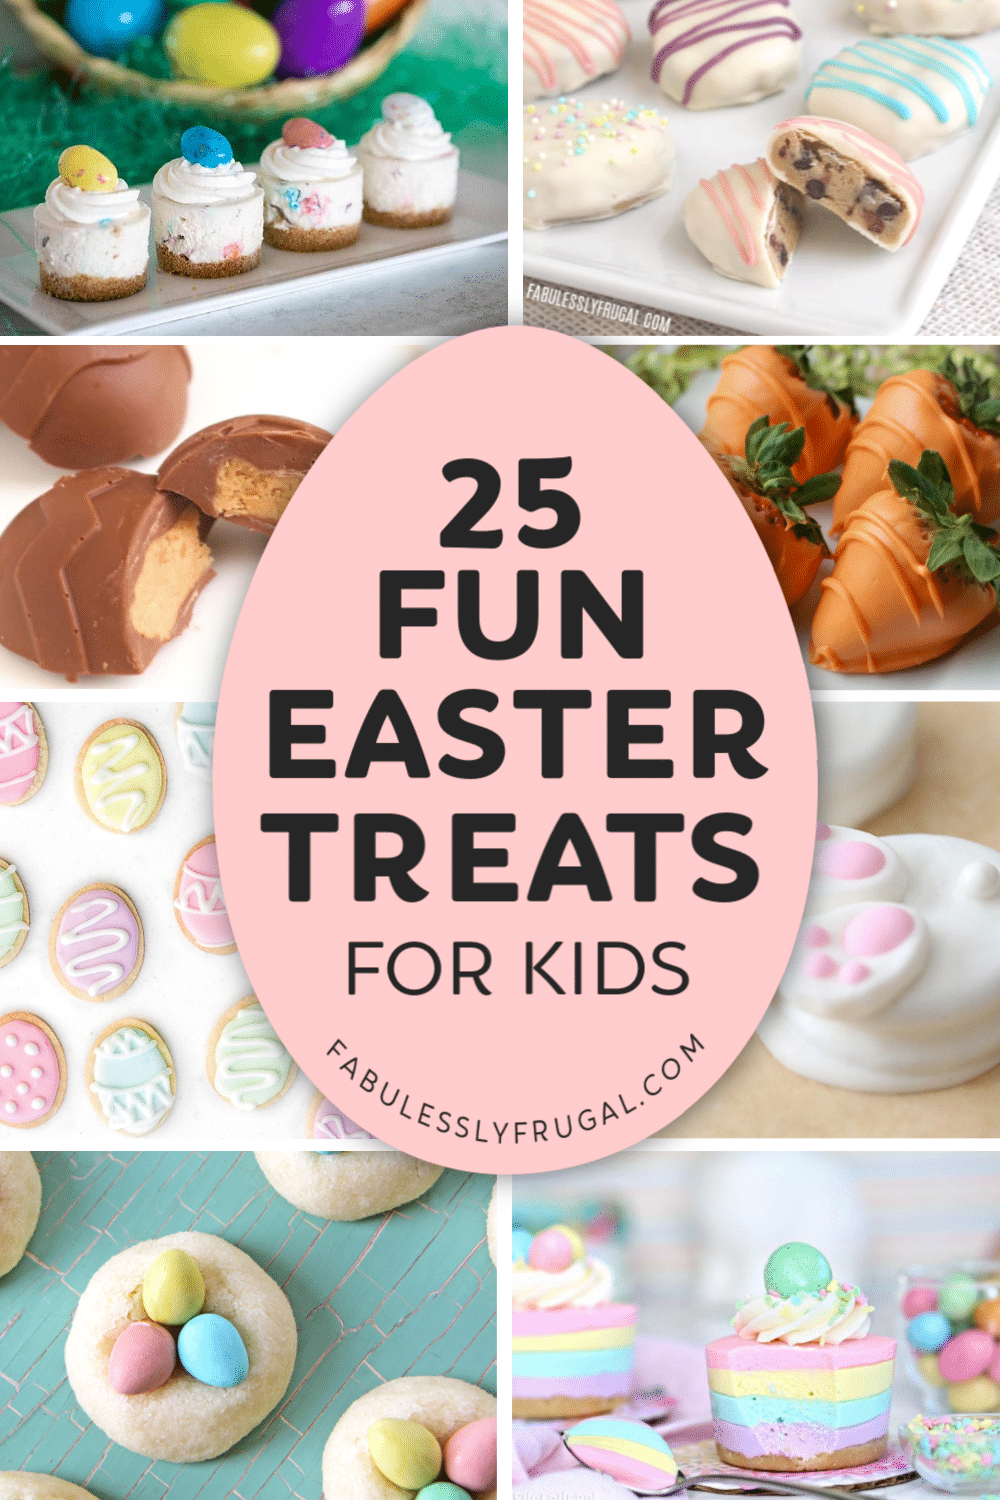 25 fun Easter treats for kids